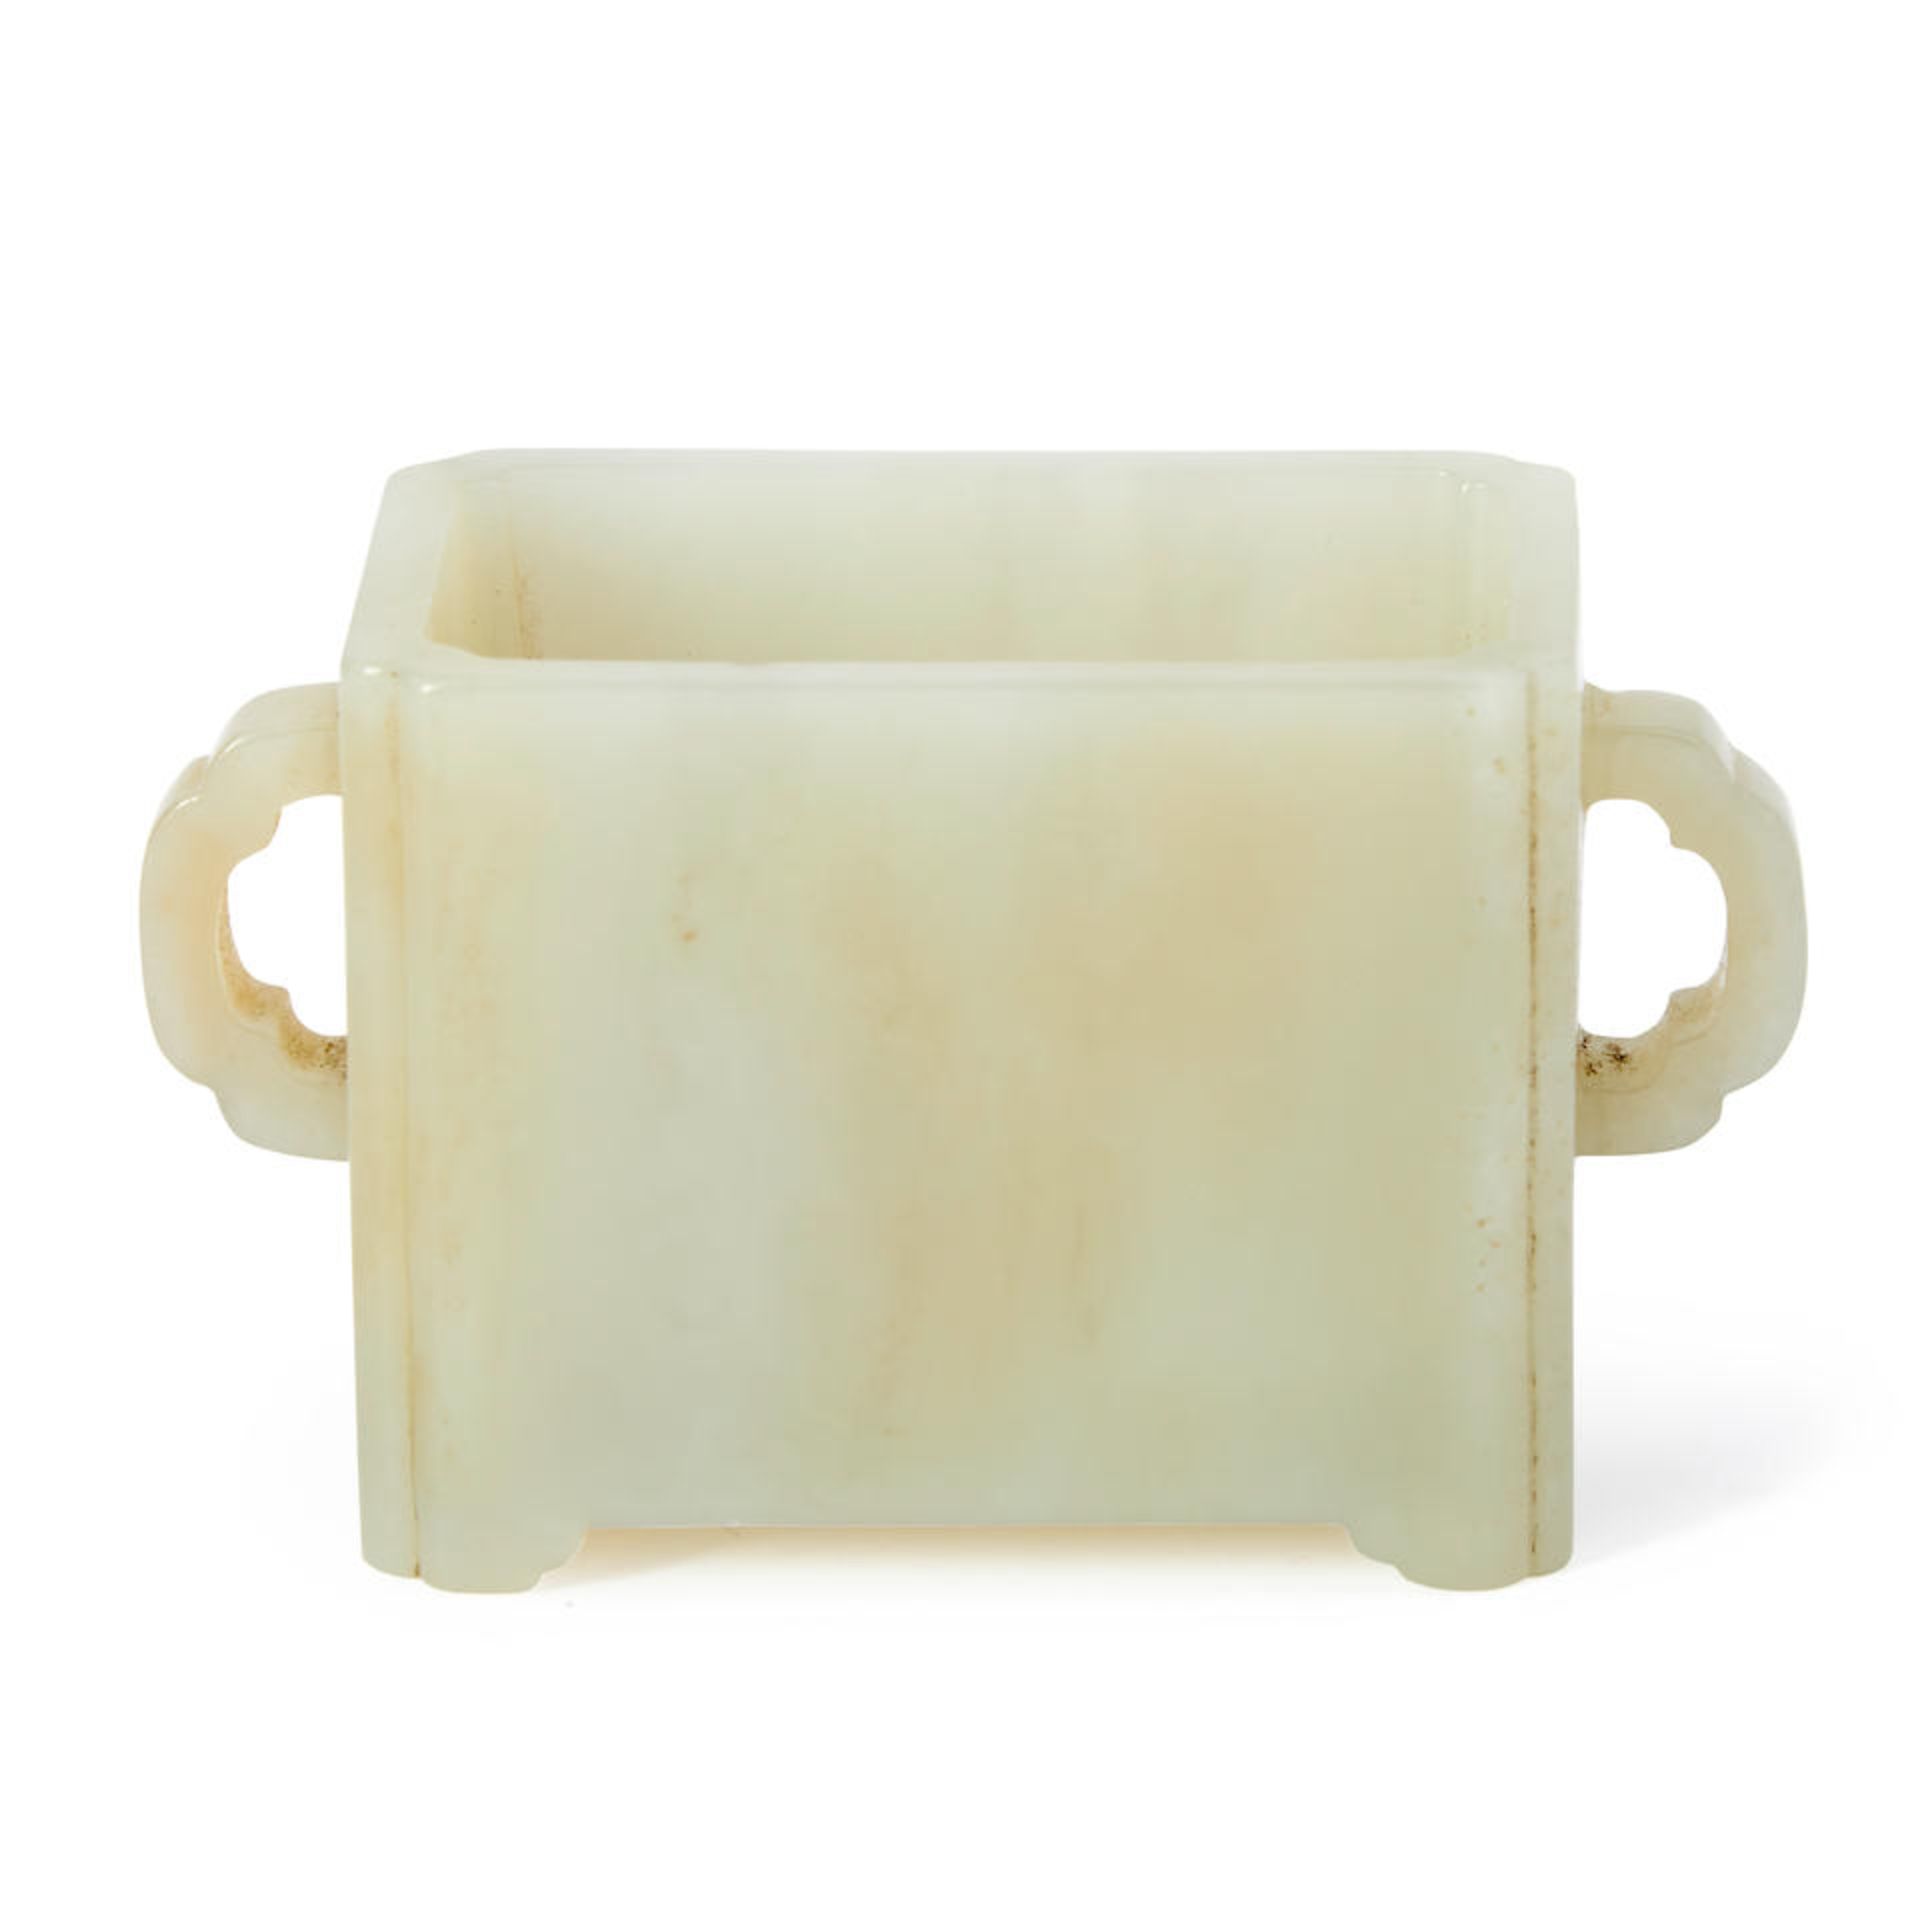 A NEPHRITE HANDLED CUP - Image 4 of 7